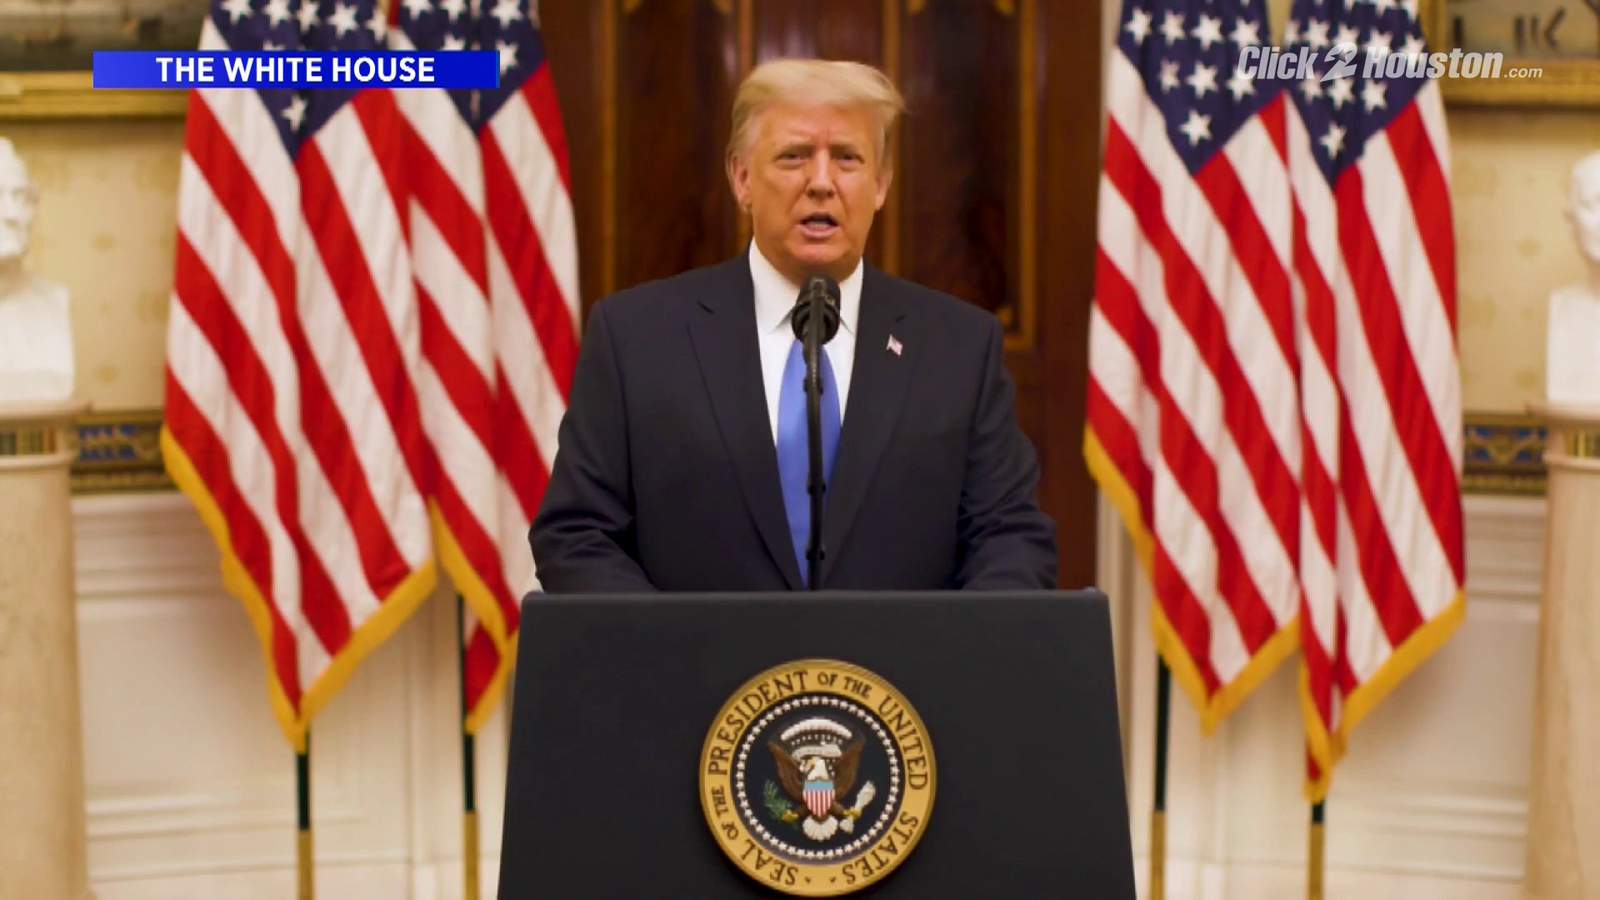 ‘We did what we came here to do’: Trump releases farewell address but doesn’t mention Biden by name